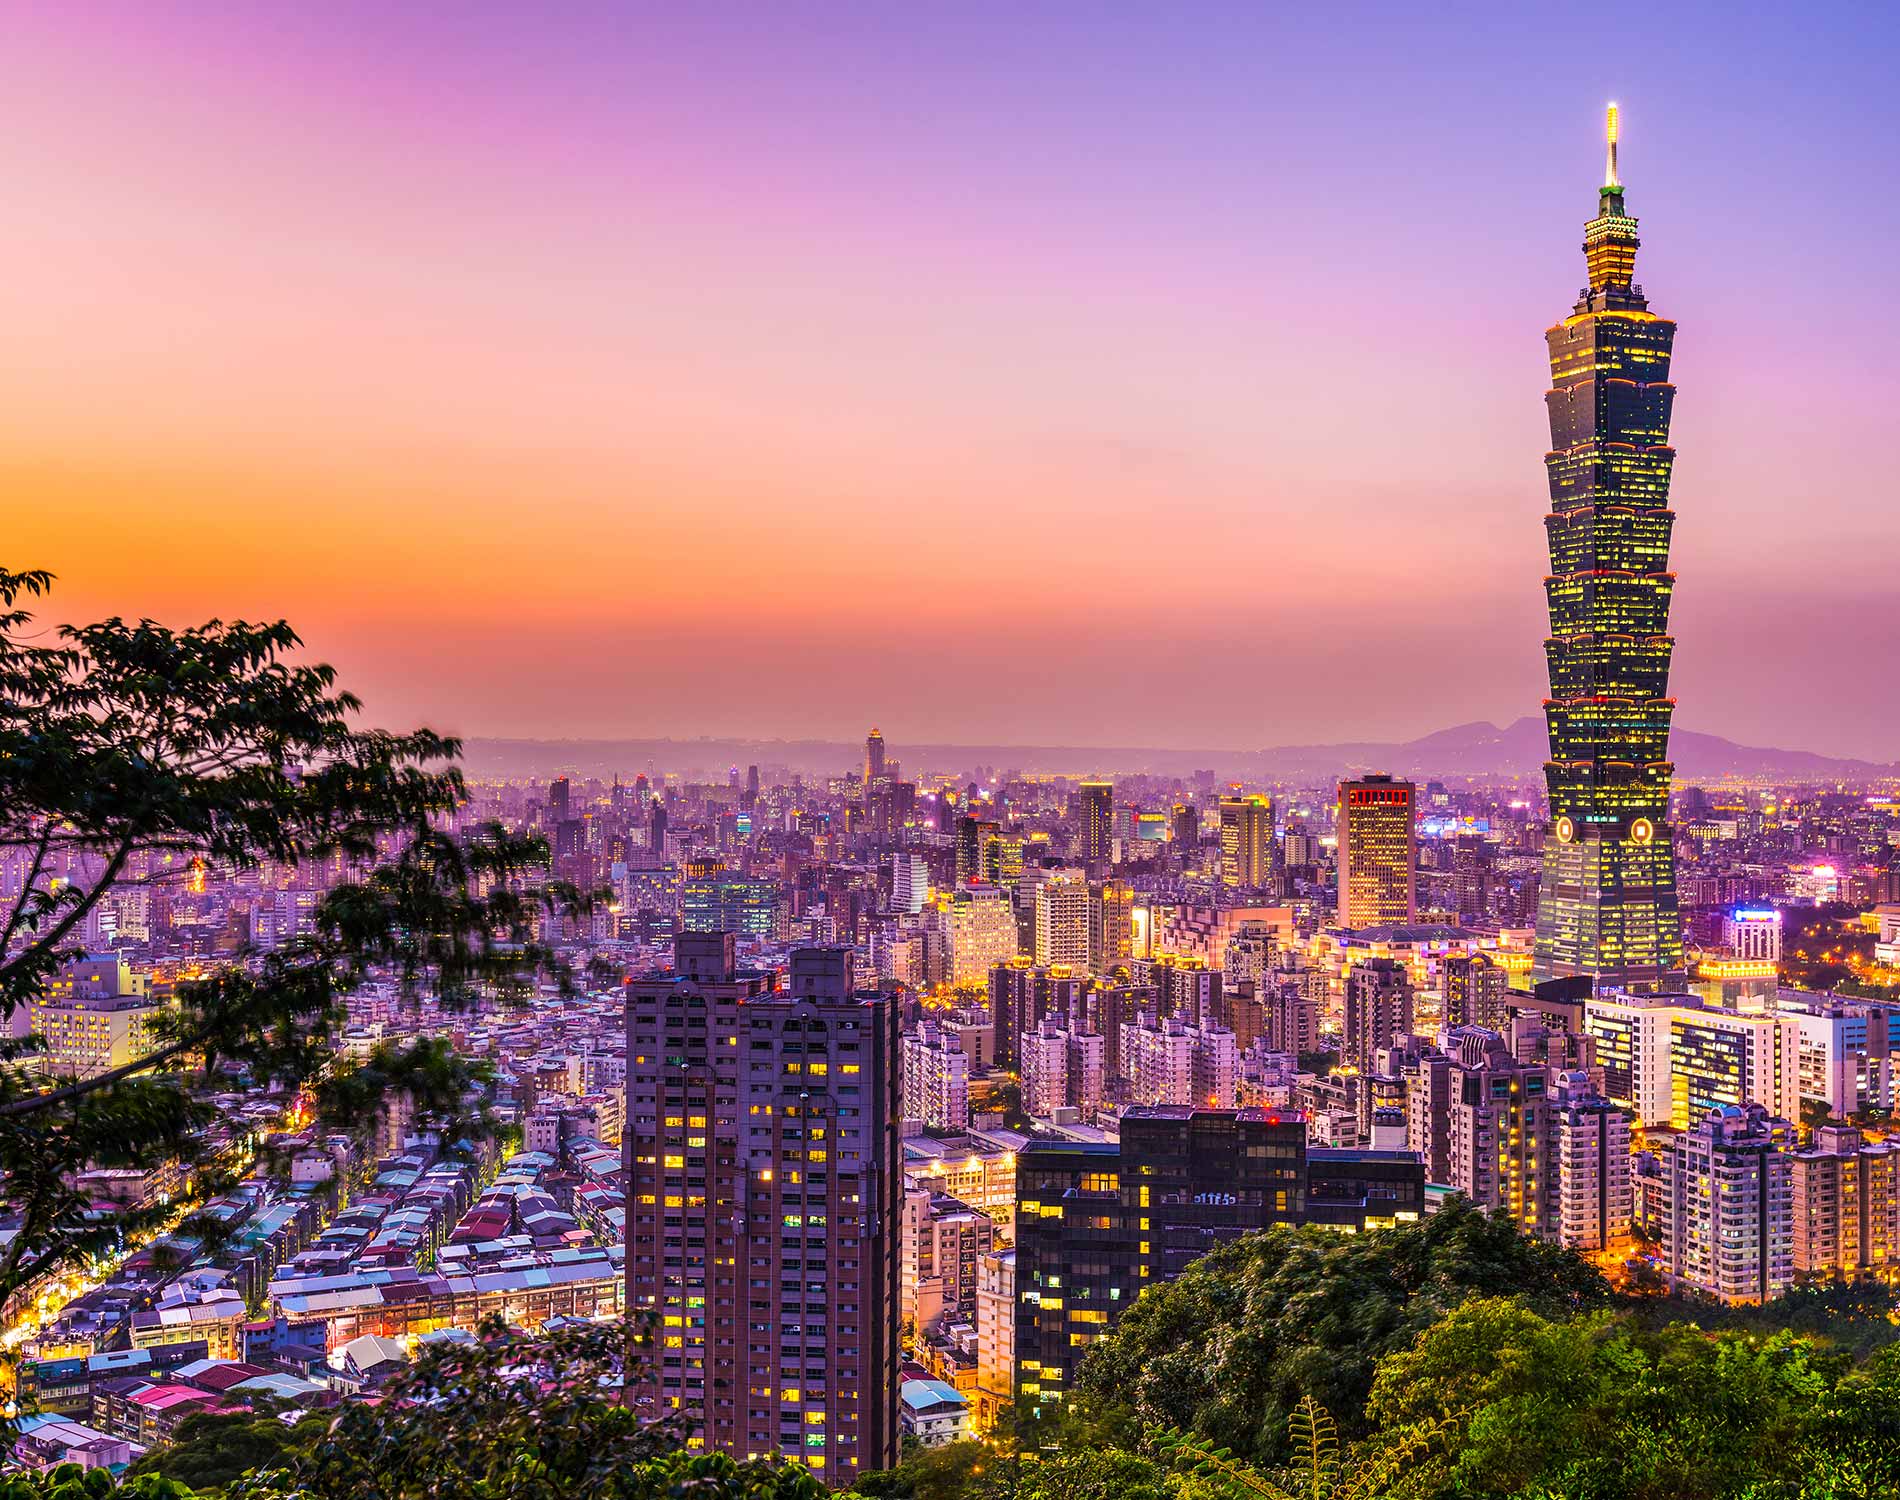 Nice Images Collection: Taipei Desktop Wallpapers